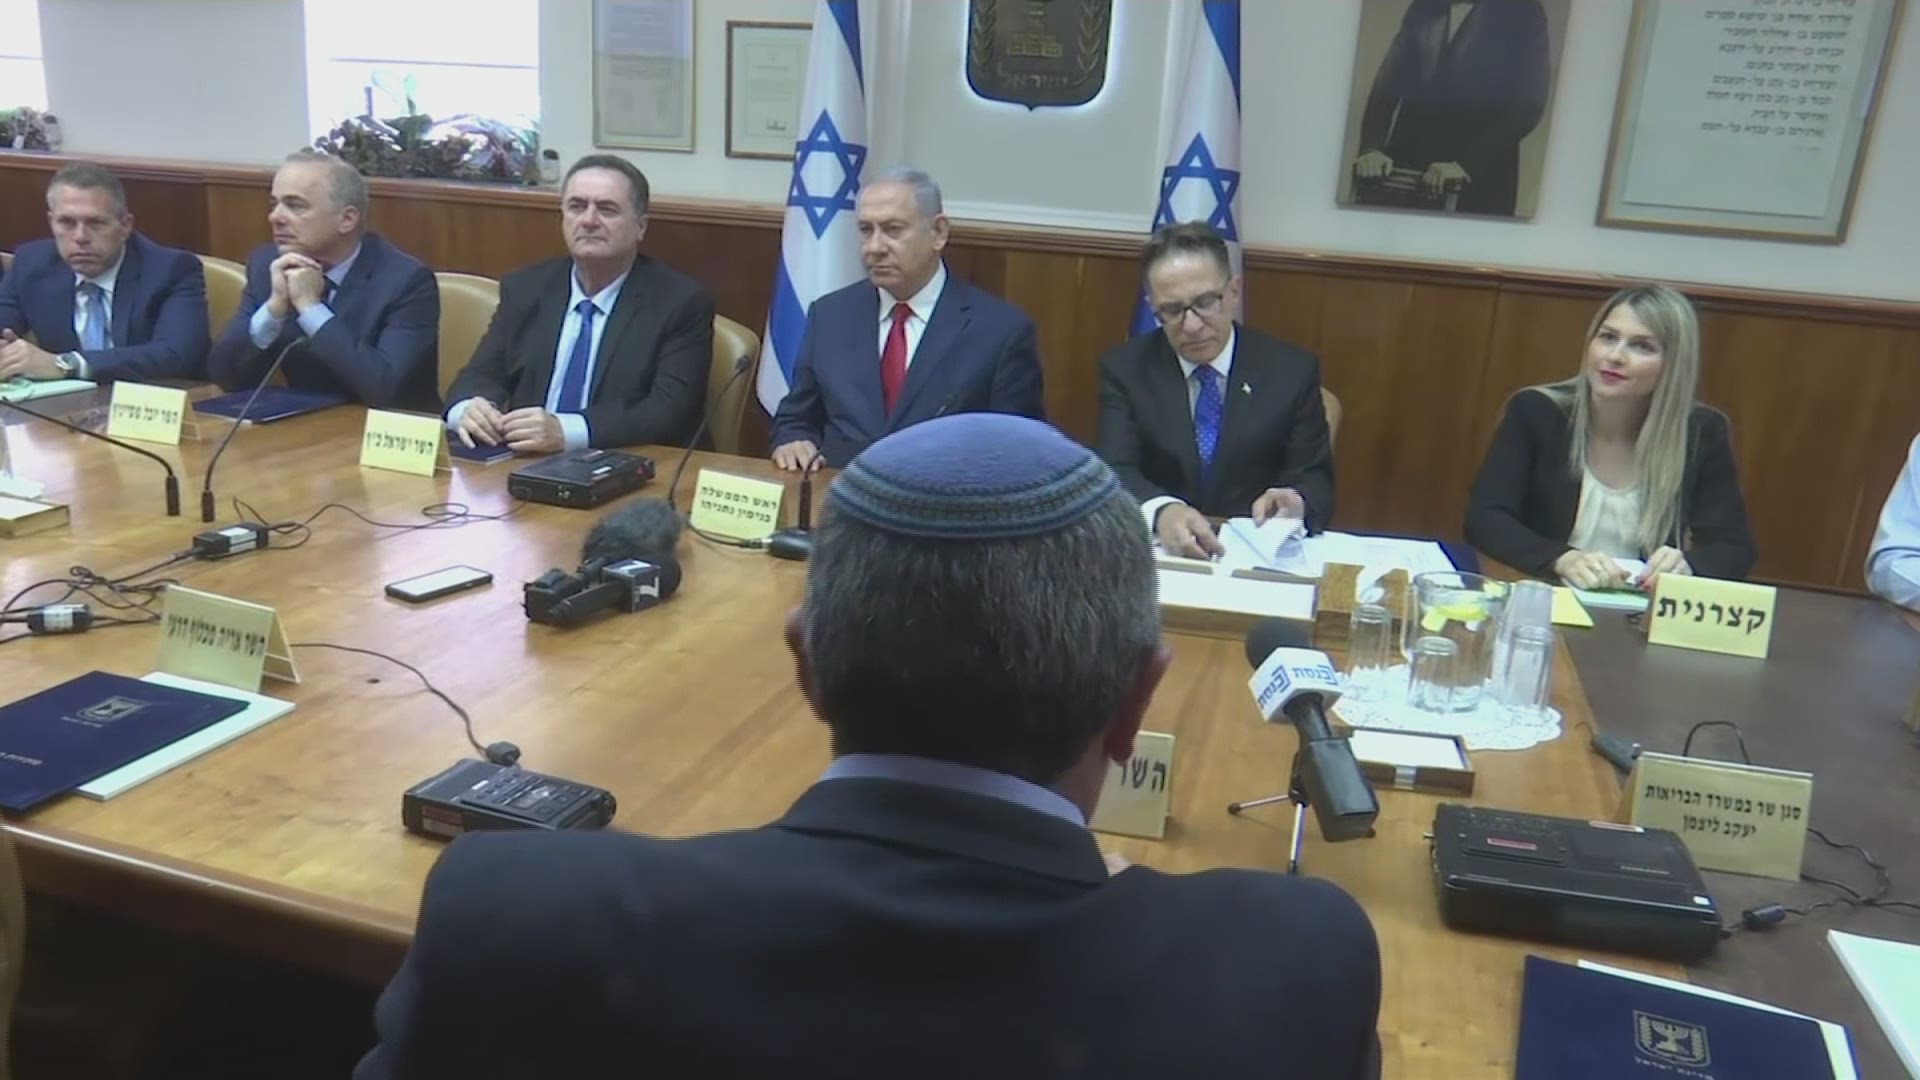 Various reactions of Israeli Prime Minister Benjamin Netanyahu and ministers at cabinet meeting concerning Iran's uranium enrichment